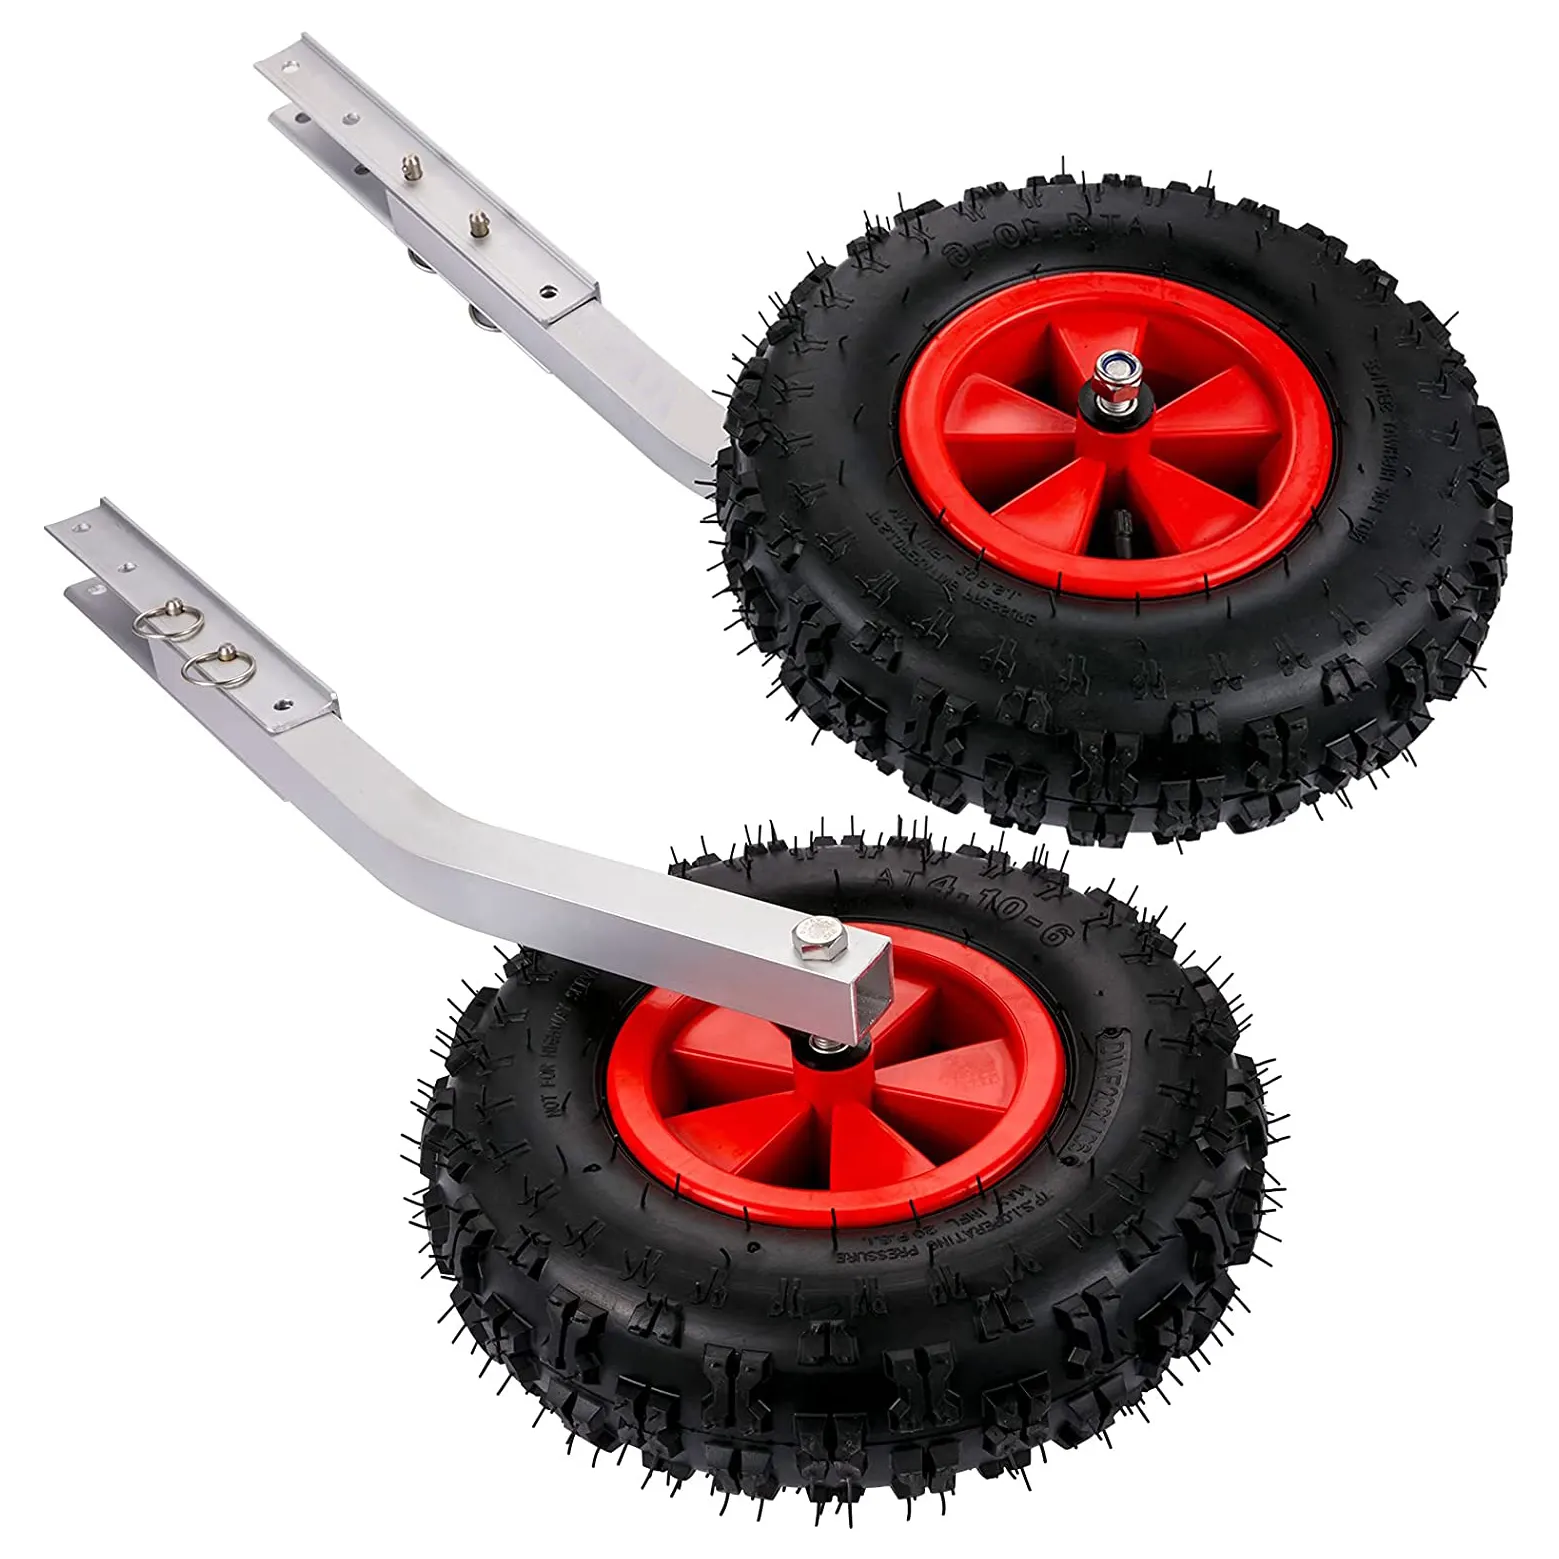 Amazon hot sale easy land boat launch wheel launching wheel Dolly for inflatable boat